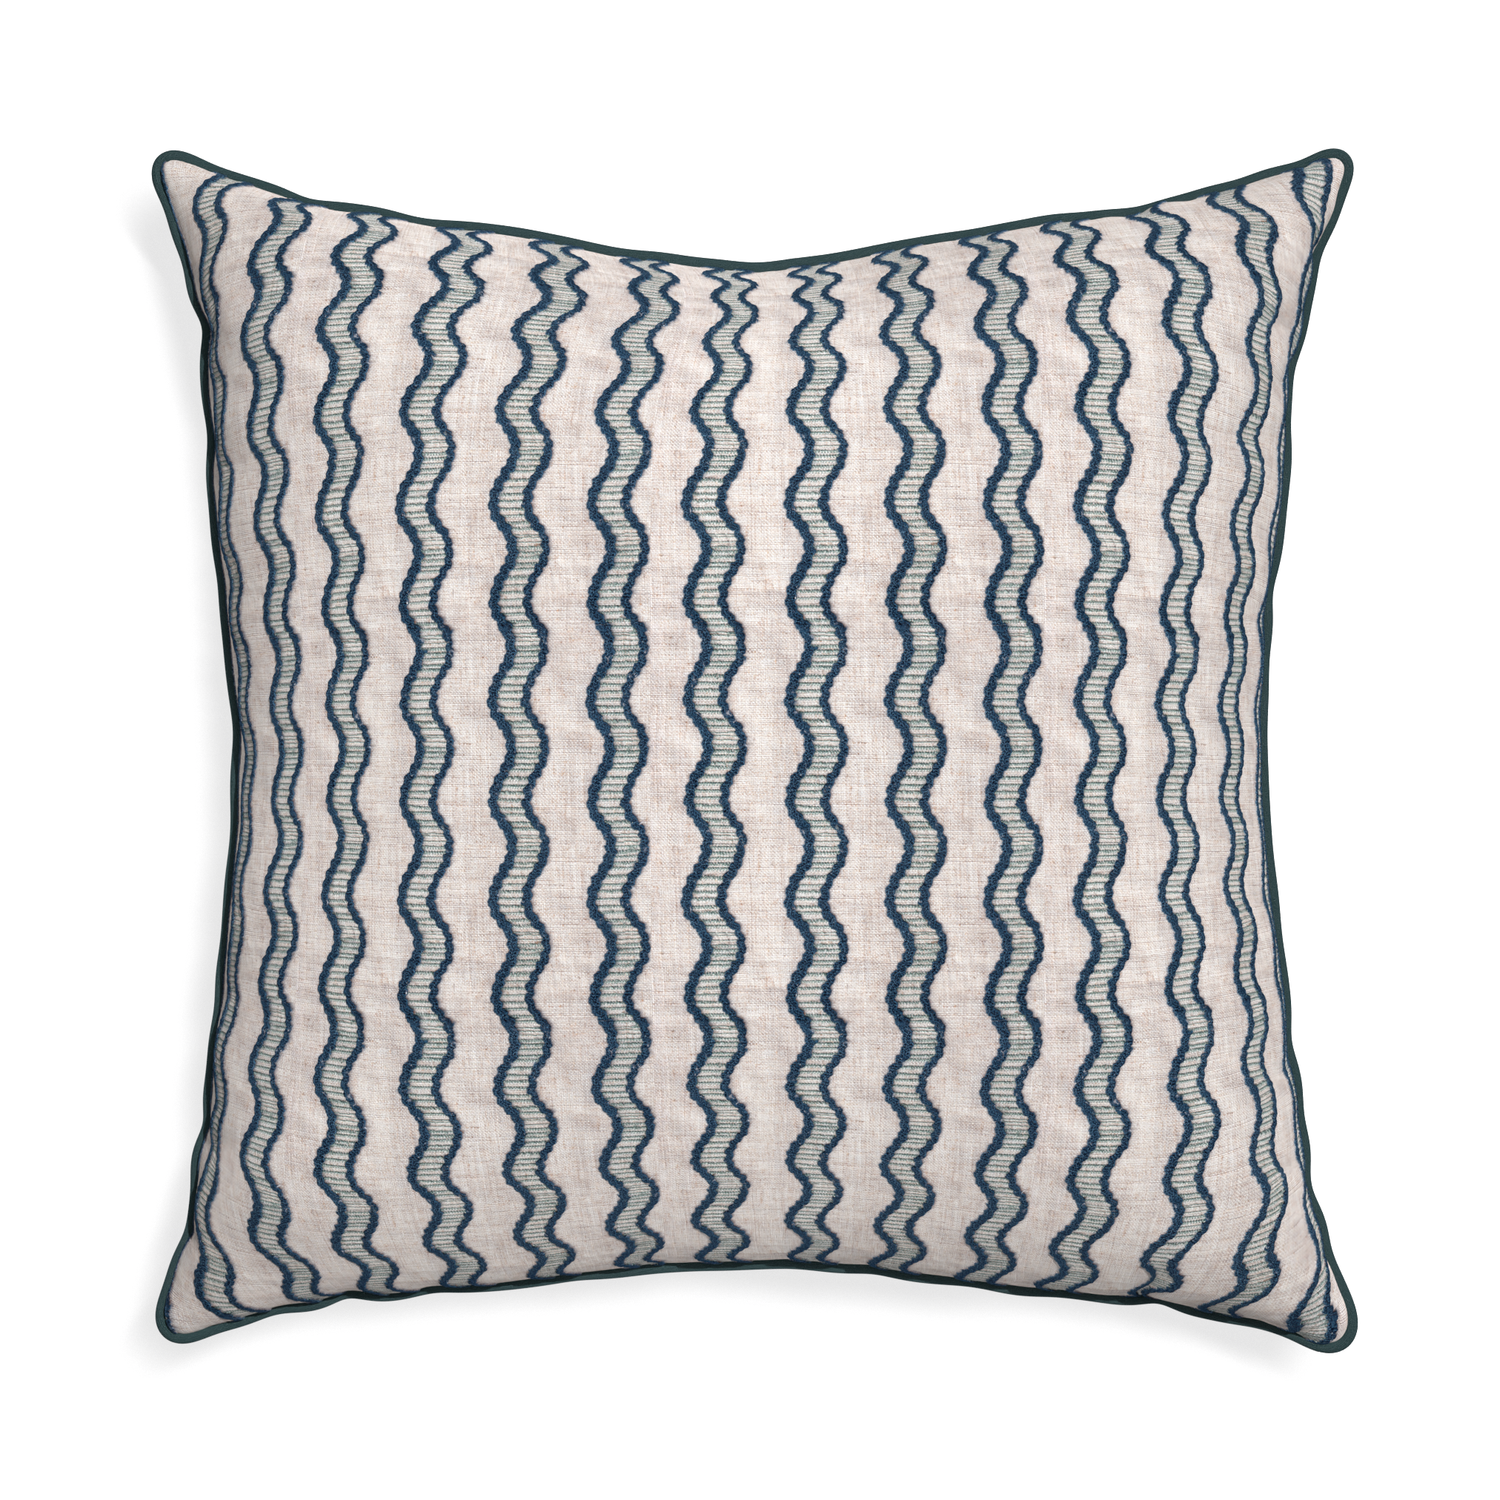 Euro-sham beatrice custom embroidered wavepillow with p piping on white background